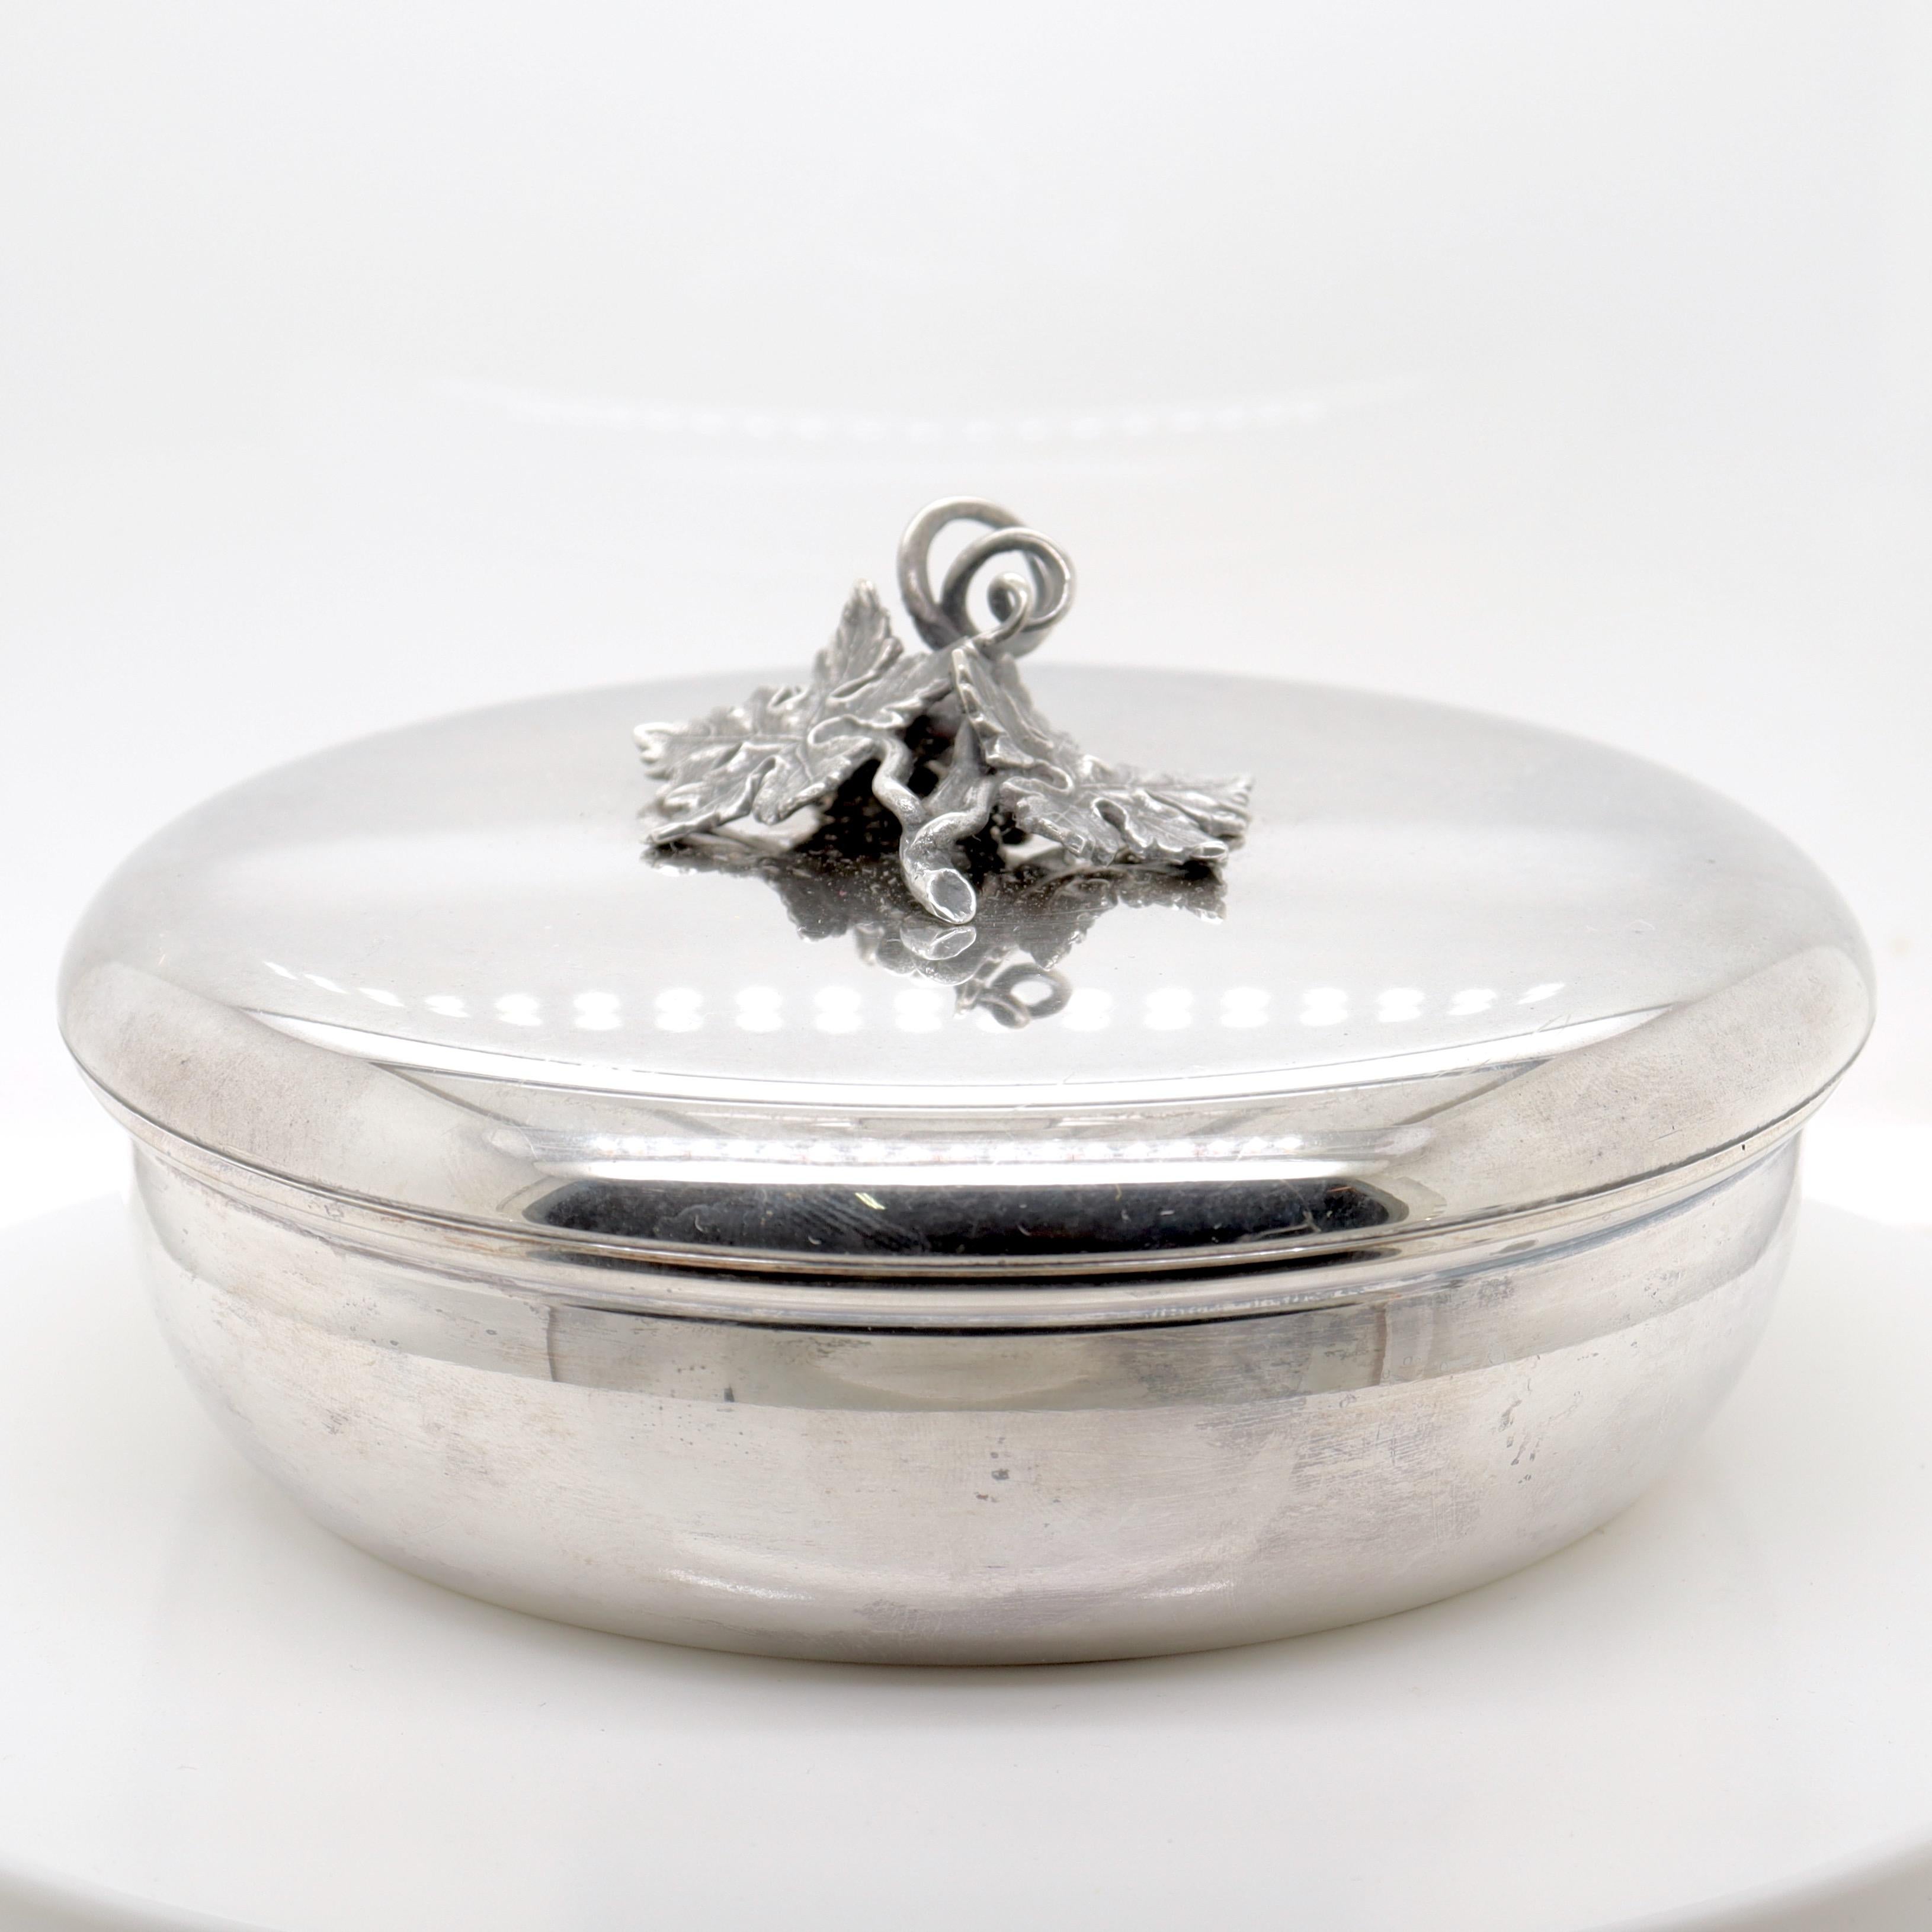 Vintage Buccellati Sterling Silver Round Dresser Box with Grapes & Leaves Finial 1